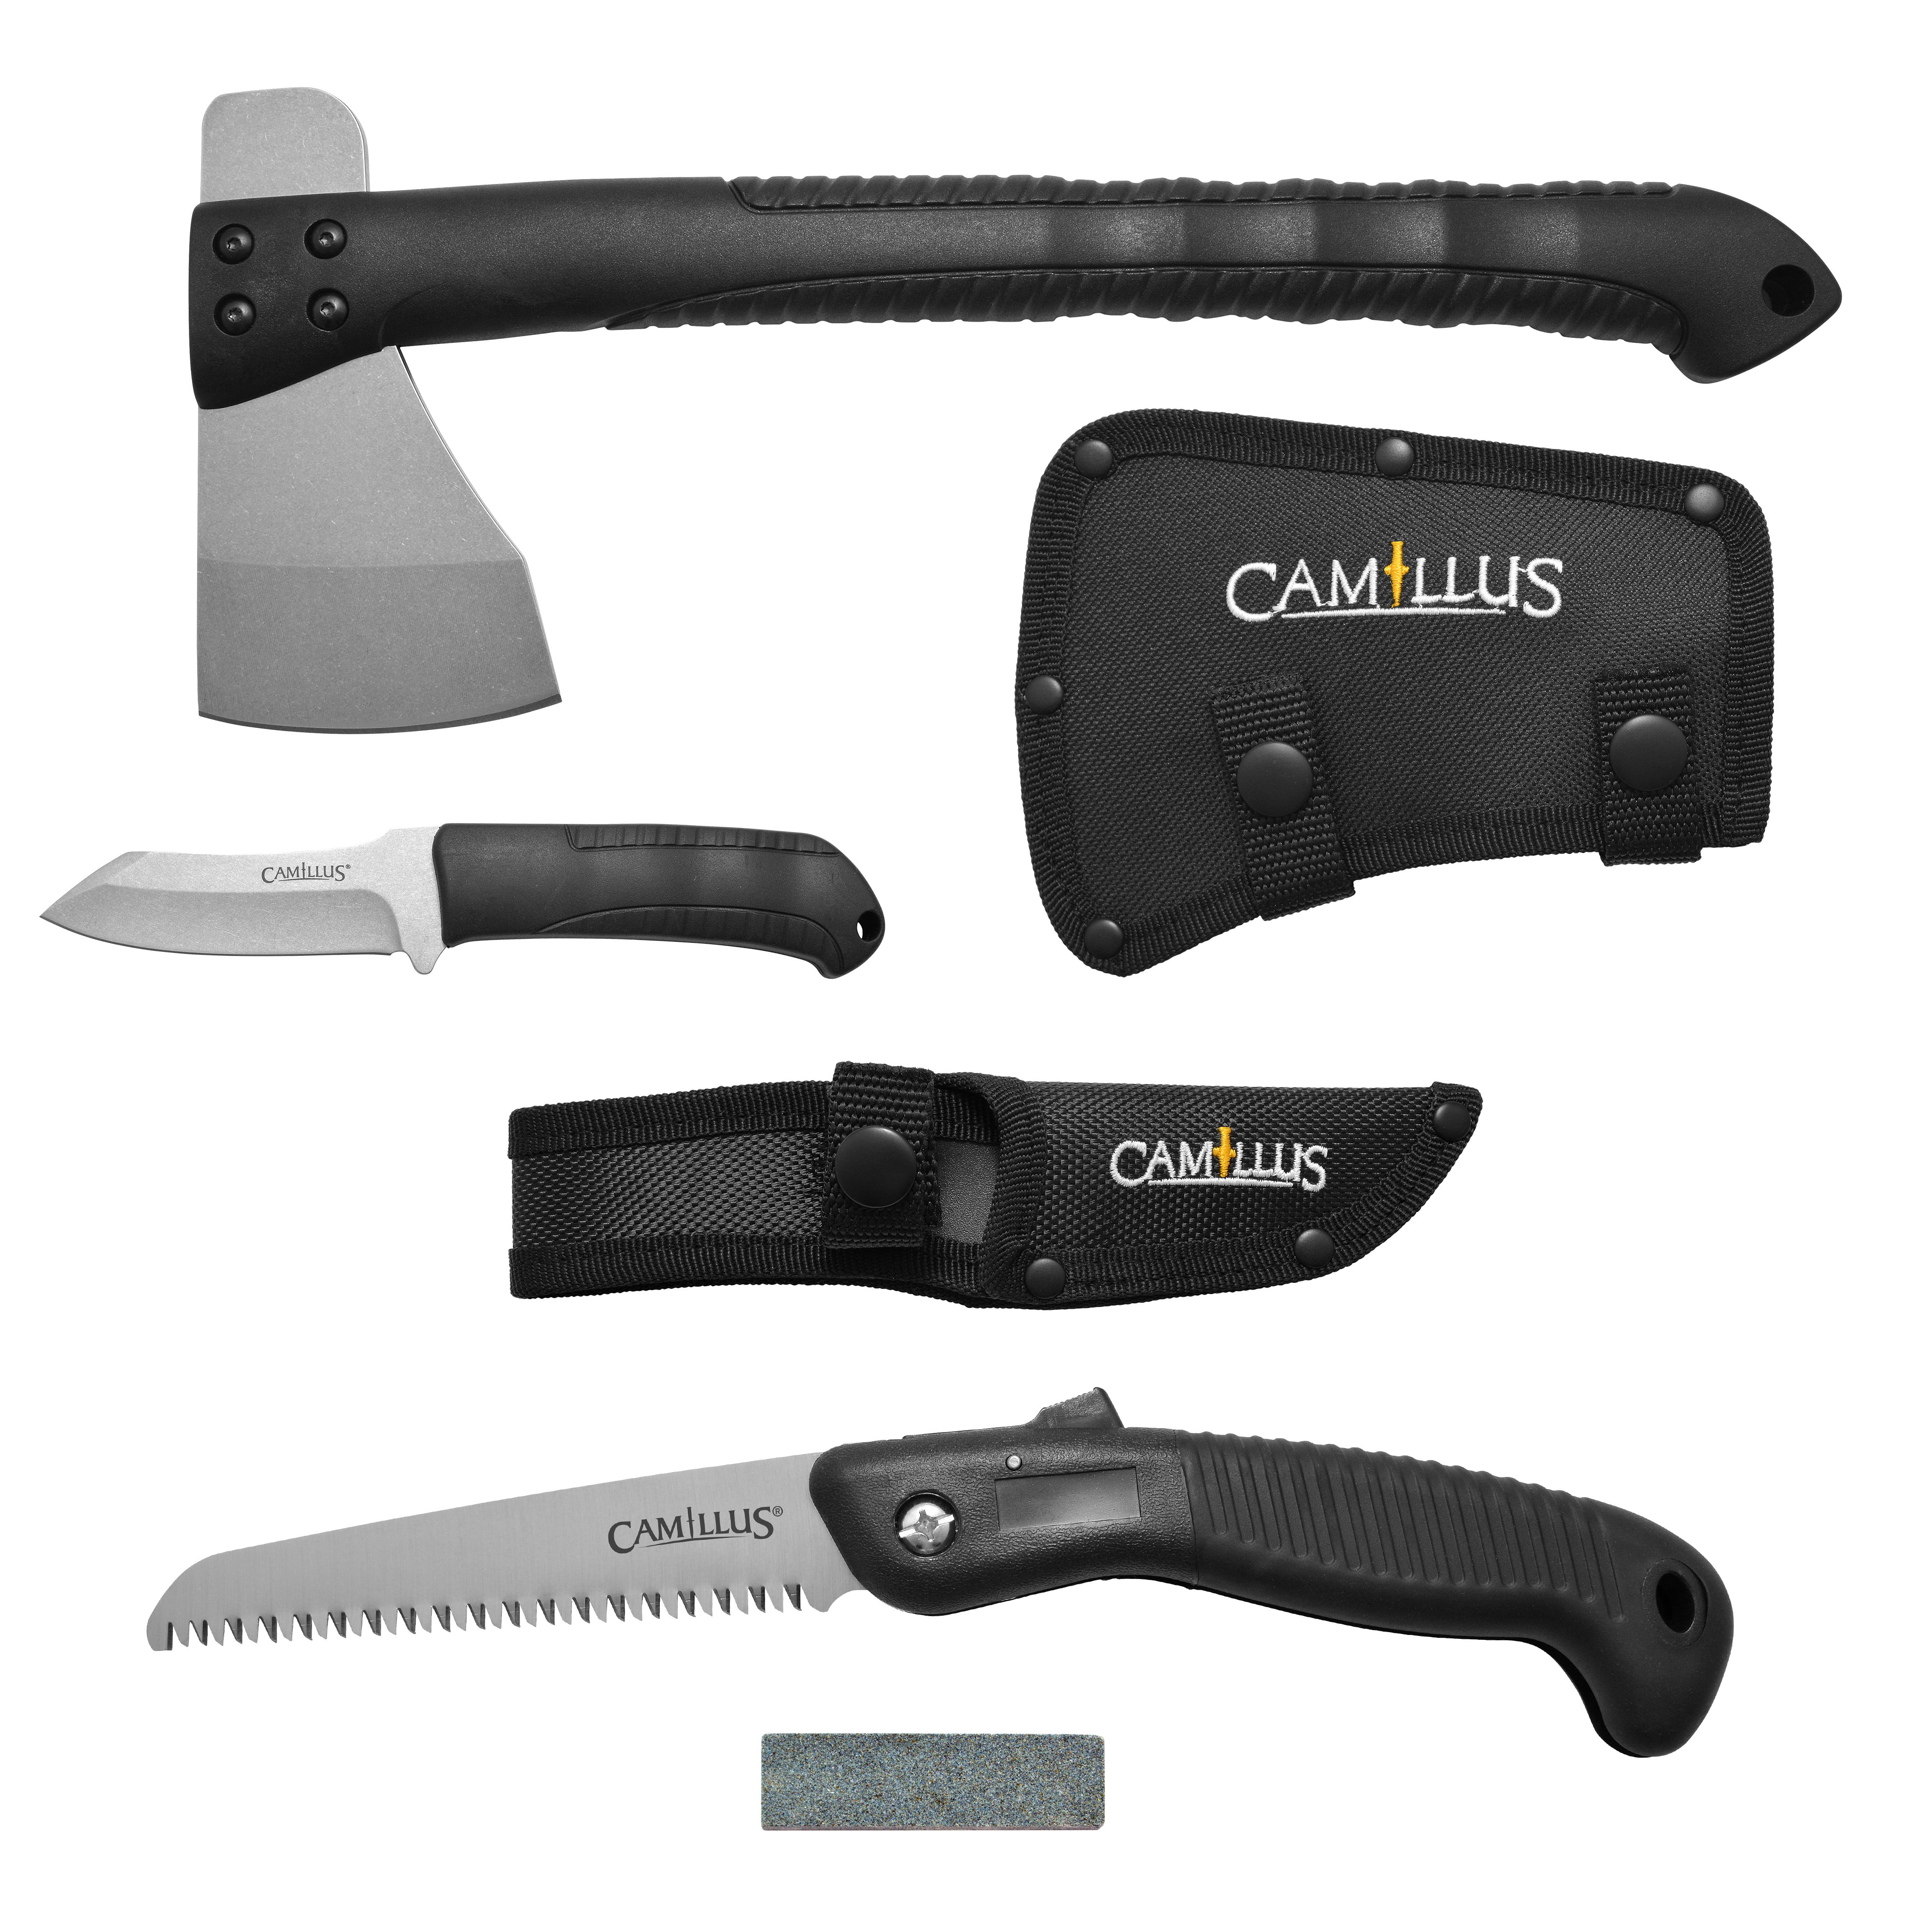 Camillus Multi-Tool Camp Pack, 4-Tools, 13" Hatchet and Sheath, 7" Fixed Bladed Tactical Knife and Sheath, 12" Lockback Folding Saw, Sharpener, for Hiking and Camping, Black